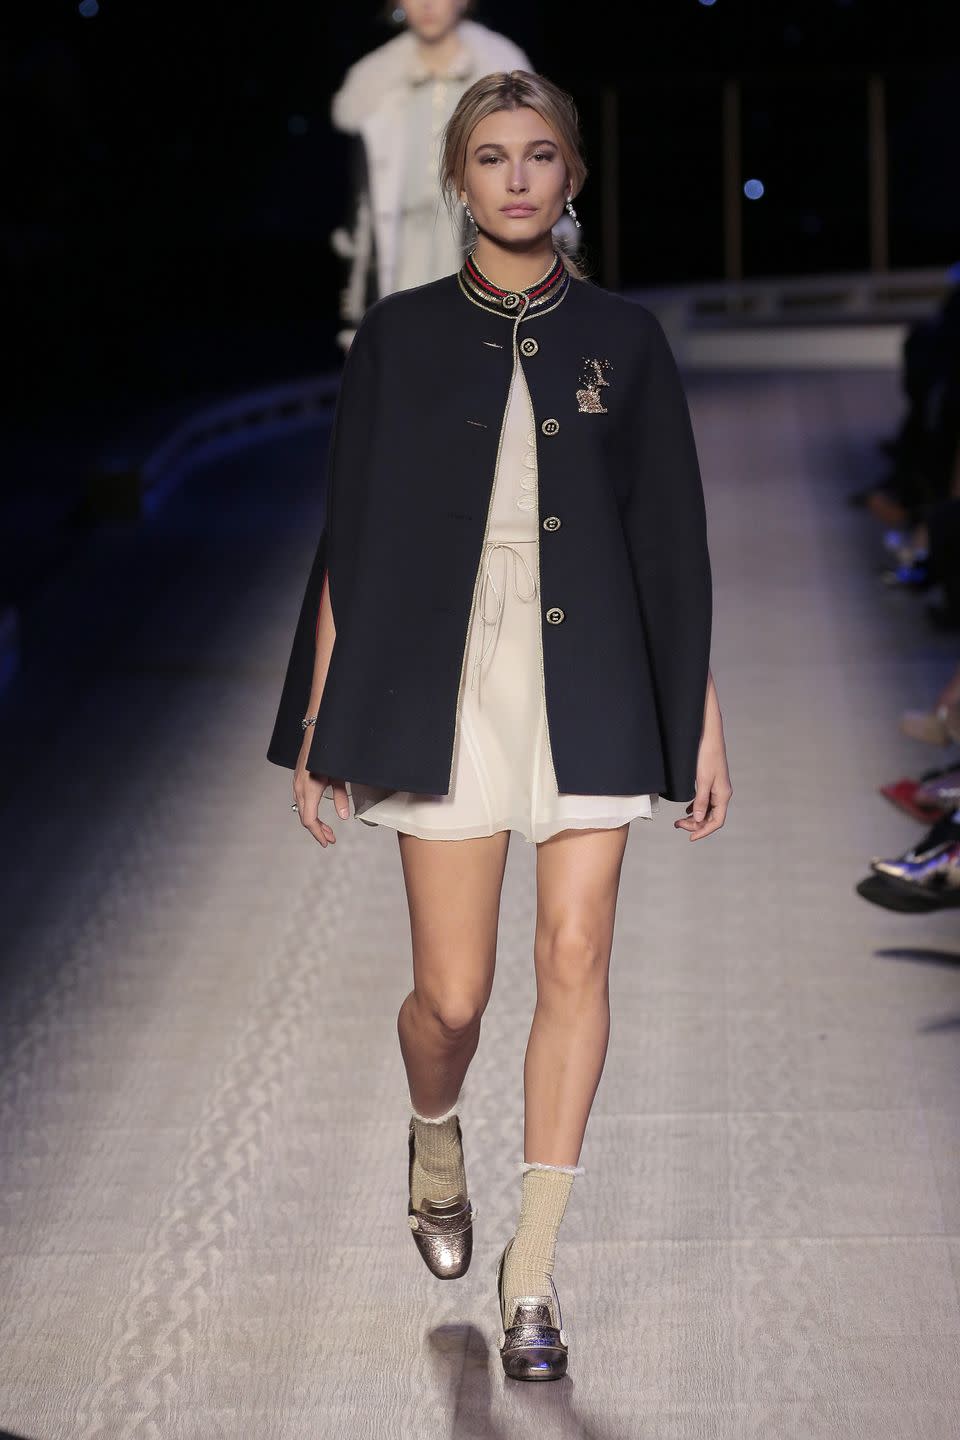 Tommy Hilfiger Women's - Runway - Fall 2016 New York Fashion Week: The Shows